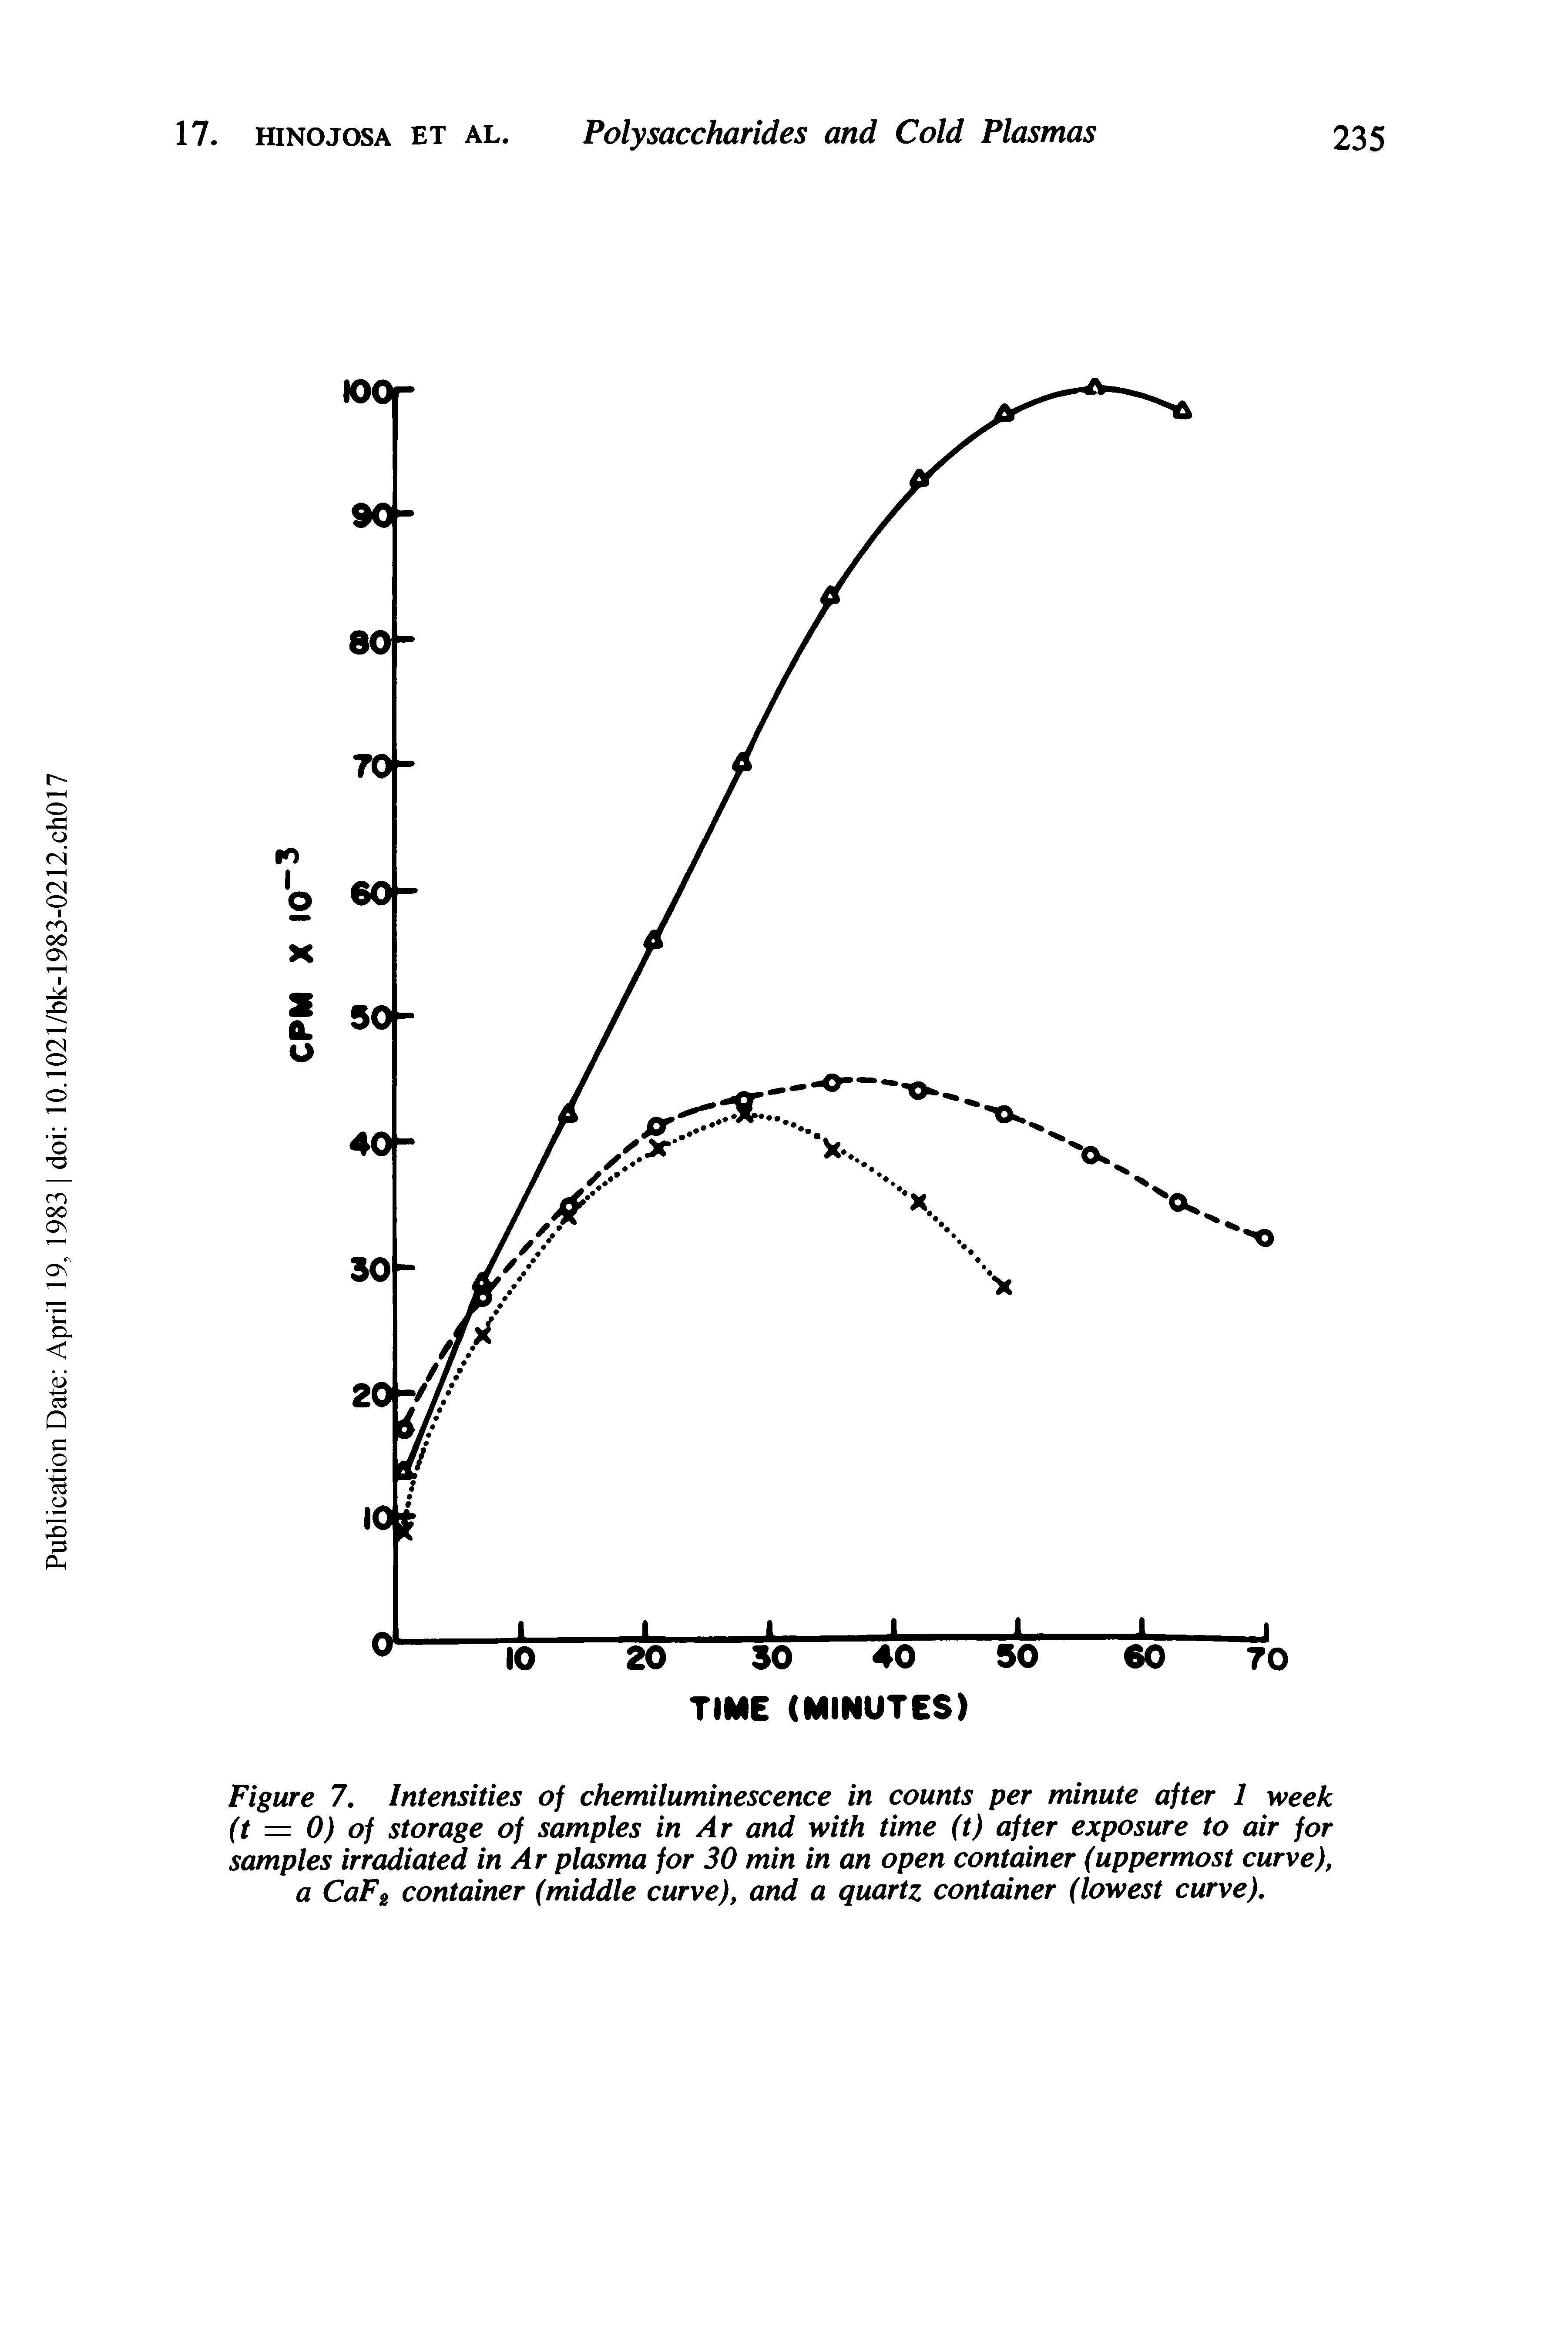 Figure 7. Intensities of chemiluminescence in counts per minute after 1 week (t = 0) of storage of samples in Ar and with time (t) after exposure to air for samples irradiated in Ar plasma for 30 min in an open container (uppermost curve), a Cap2 container (middle curve), and a quartz container (lowest curve).